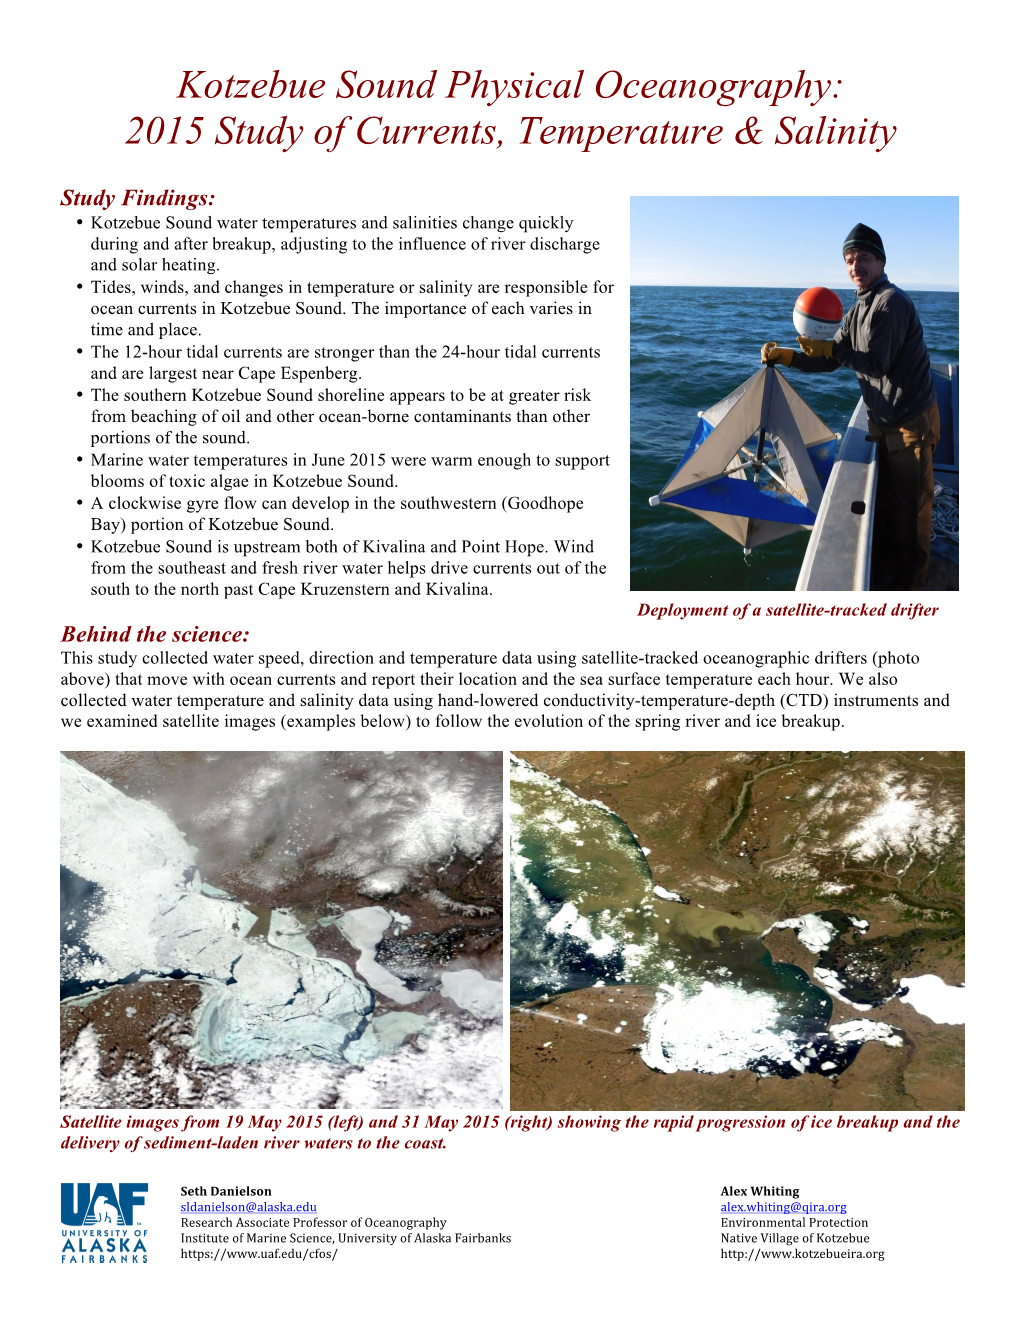 Kotzebue Sound Physical Oceanography: 2015 Study of Currents, Temperature & Salinity